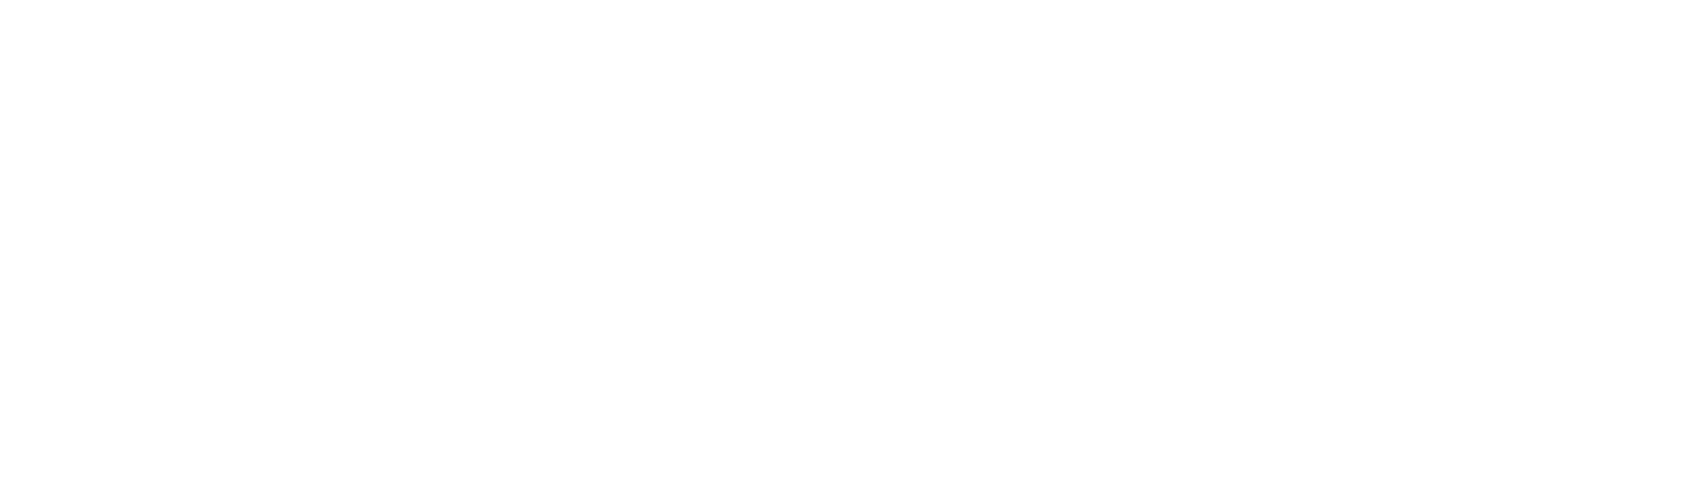 Afl Footy Tipping Chart